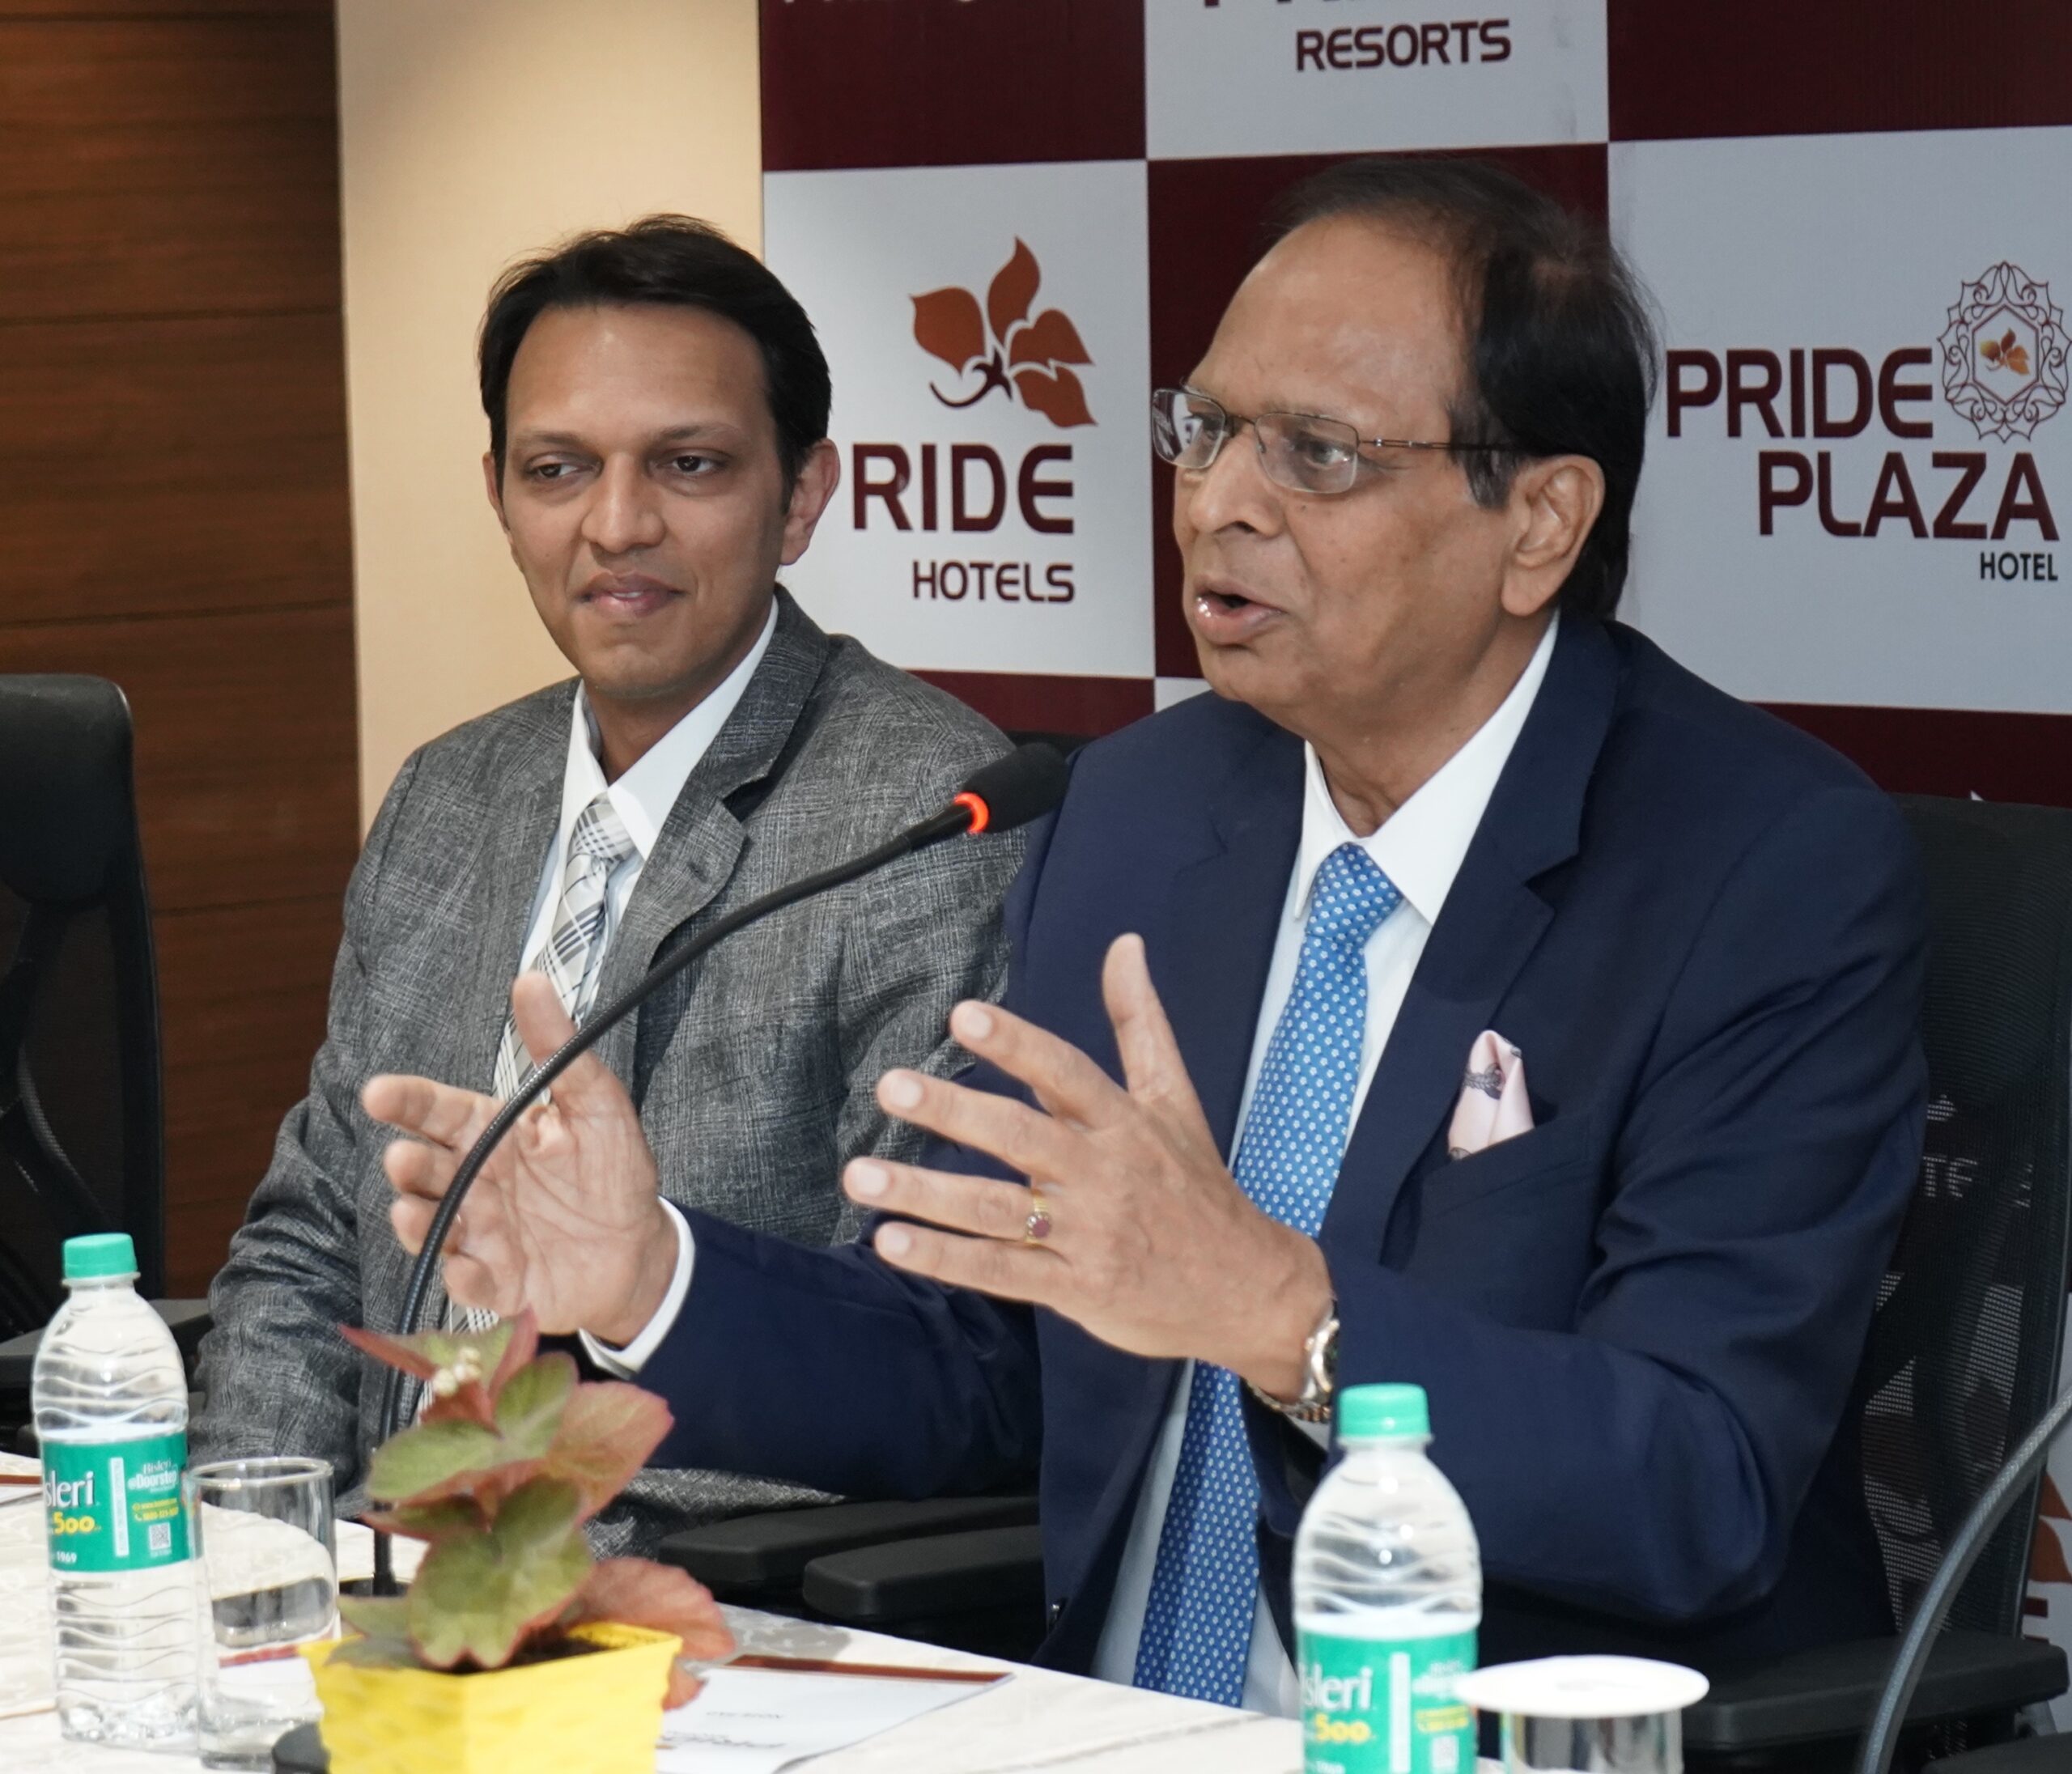 Pride Hotels Group announces the grand launch of the Pride Hotel Bhopal